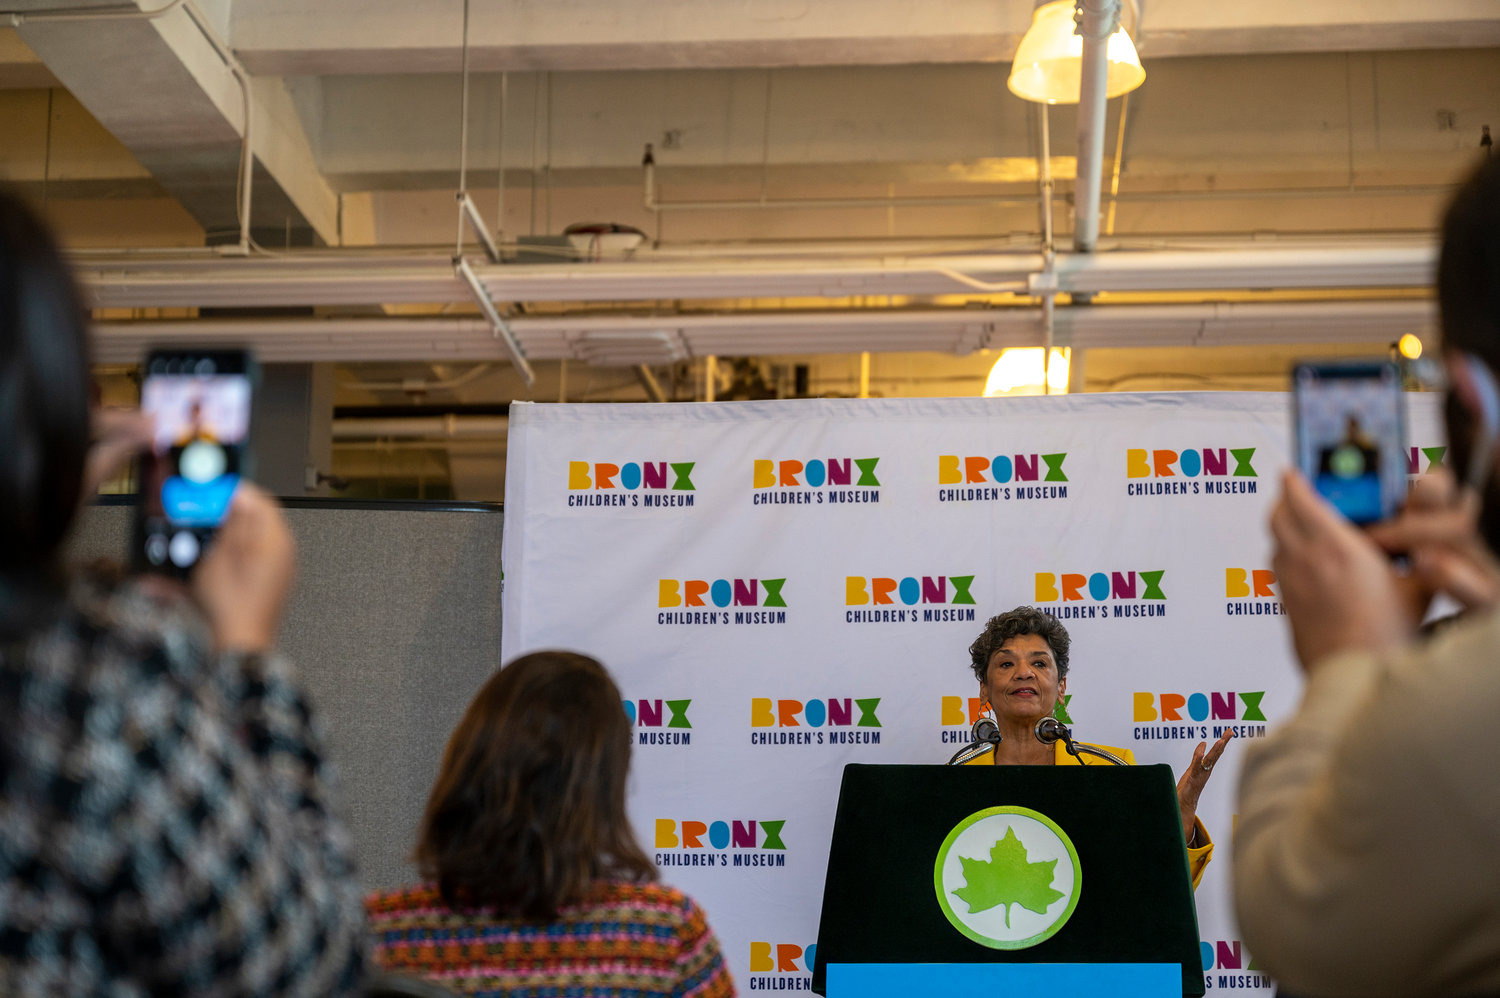 Sonia Manzano, who spent nearly 45 years as Maria on the PBS educational show ‘Sesame Street,’ says facilities like the Bronx Children’s Museum go a long way in helping young kids learn, because ‘all you have to do is point them in the right direction, and watch them fly.’ The museum is expected to open next summer.